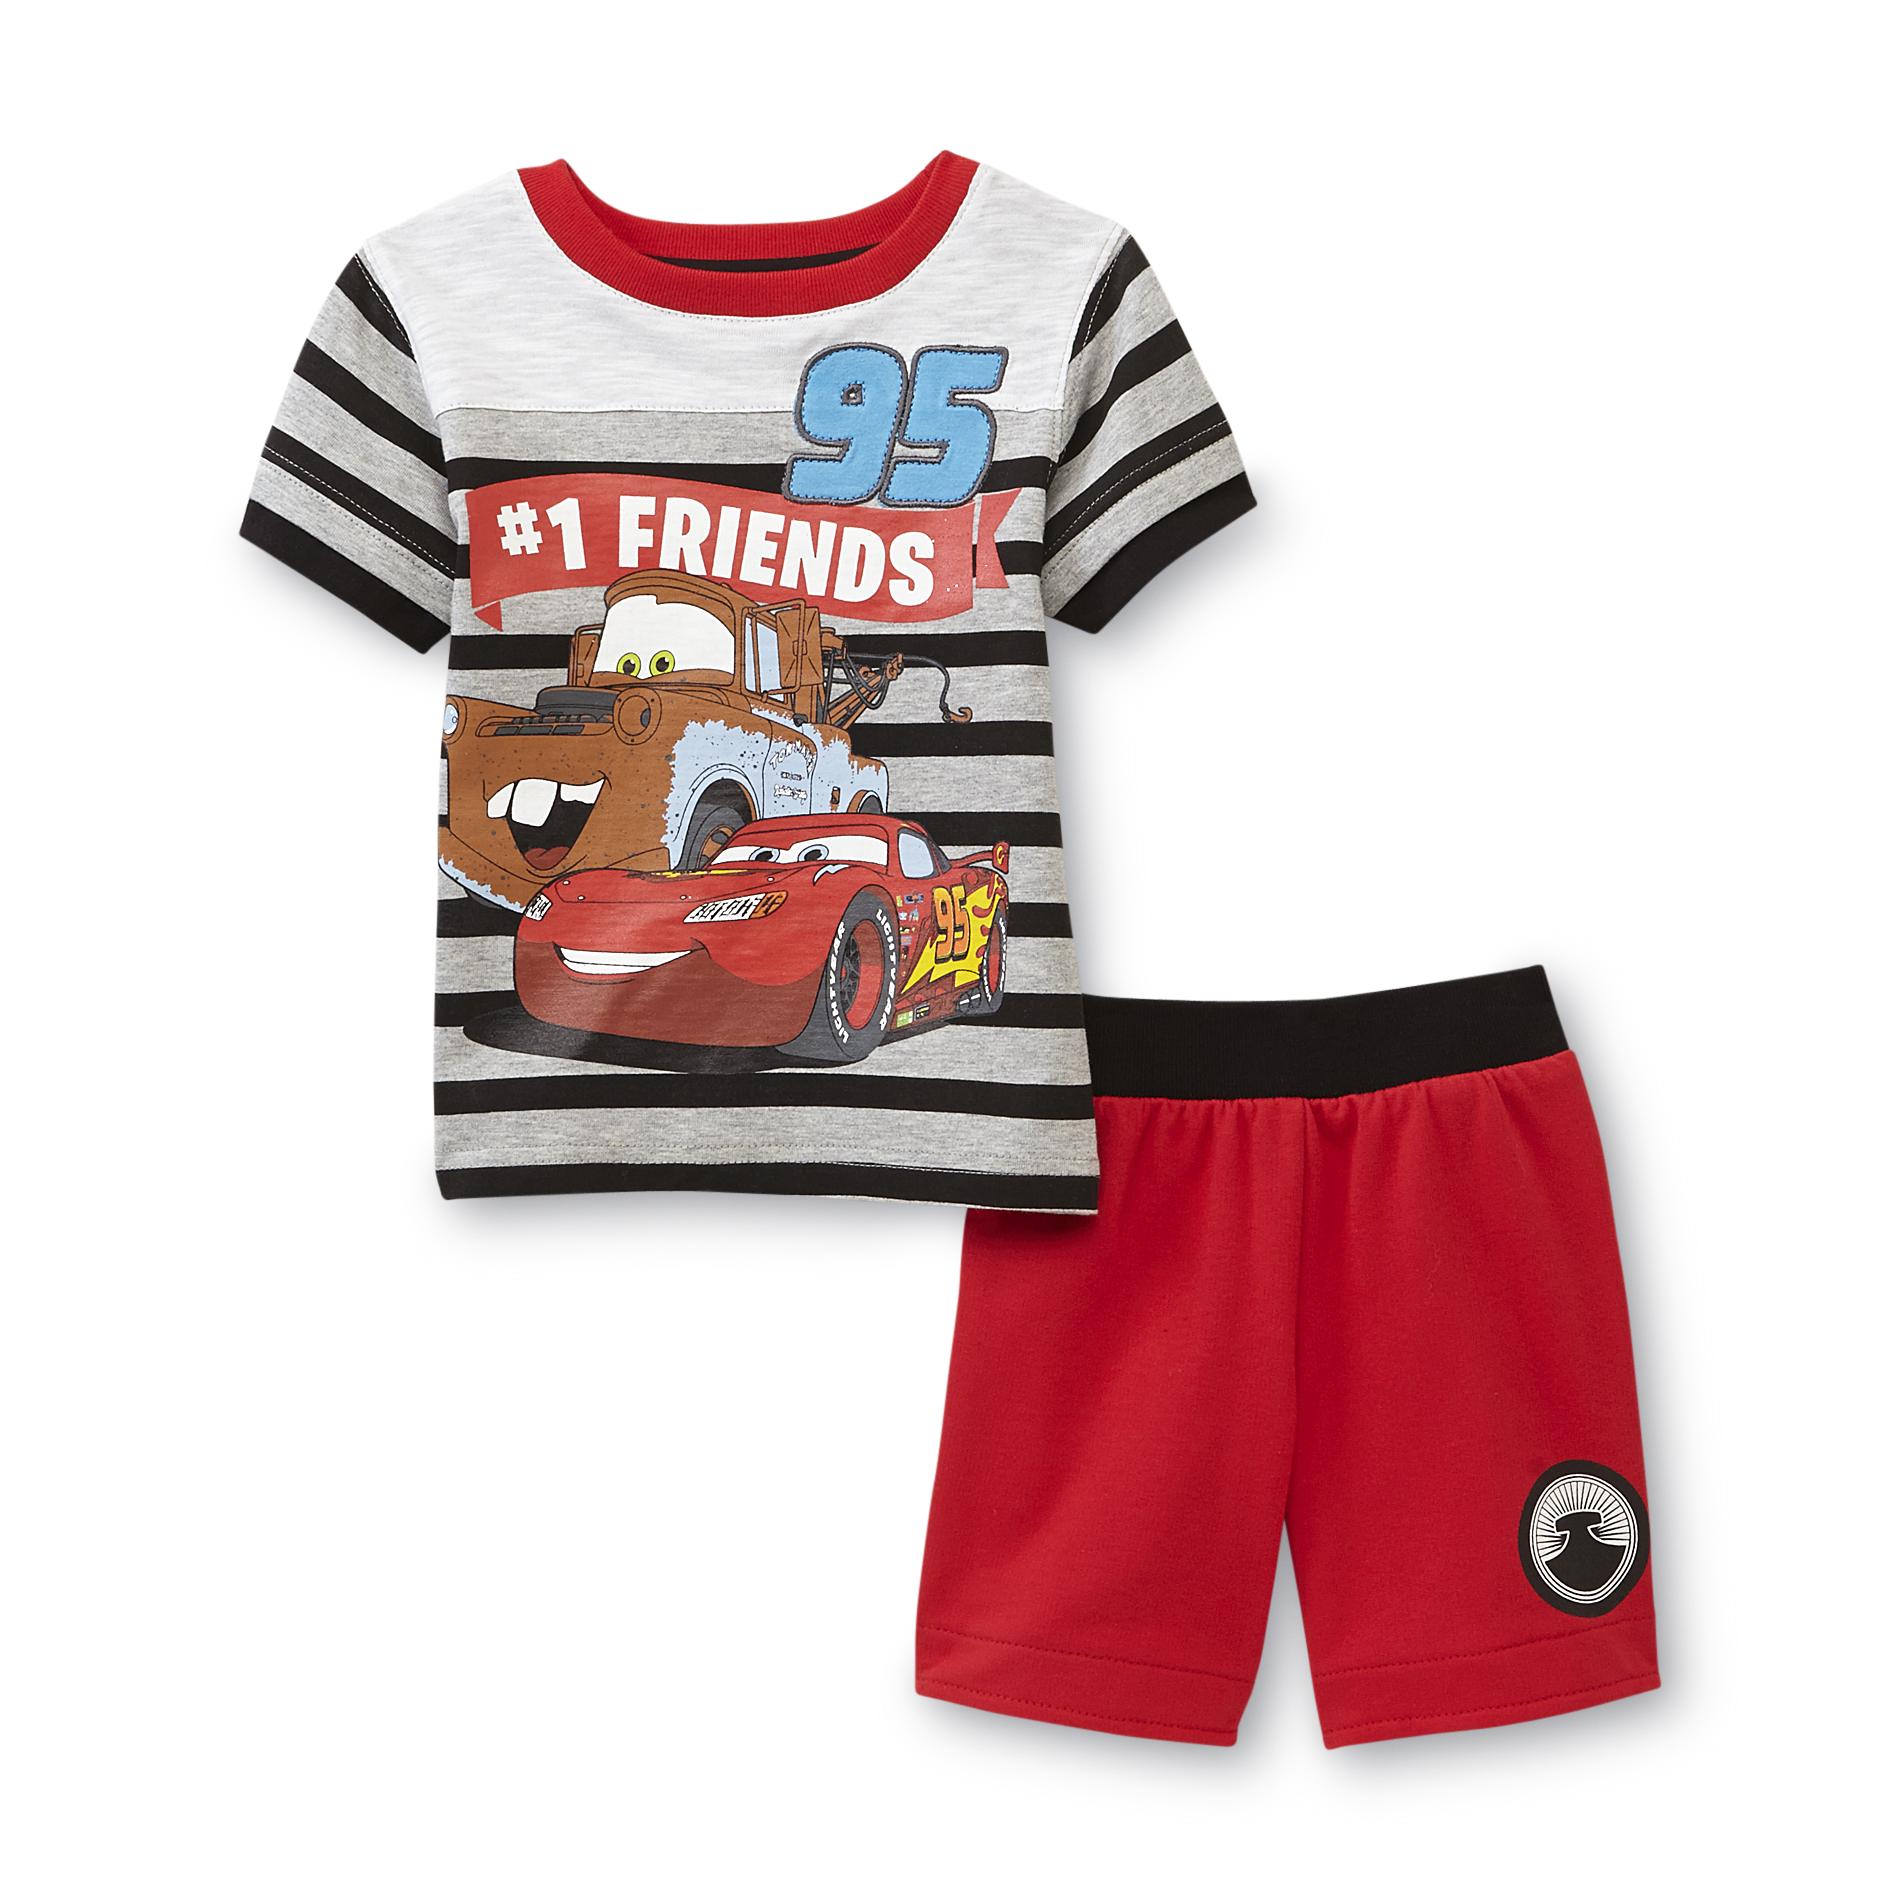 Disney Cars Infant & Toddler Boy's Graphic T-Shirt & Shorts - Striped